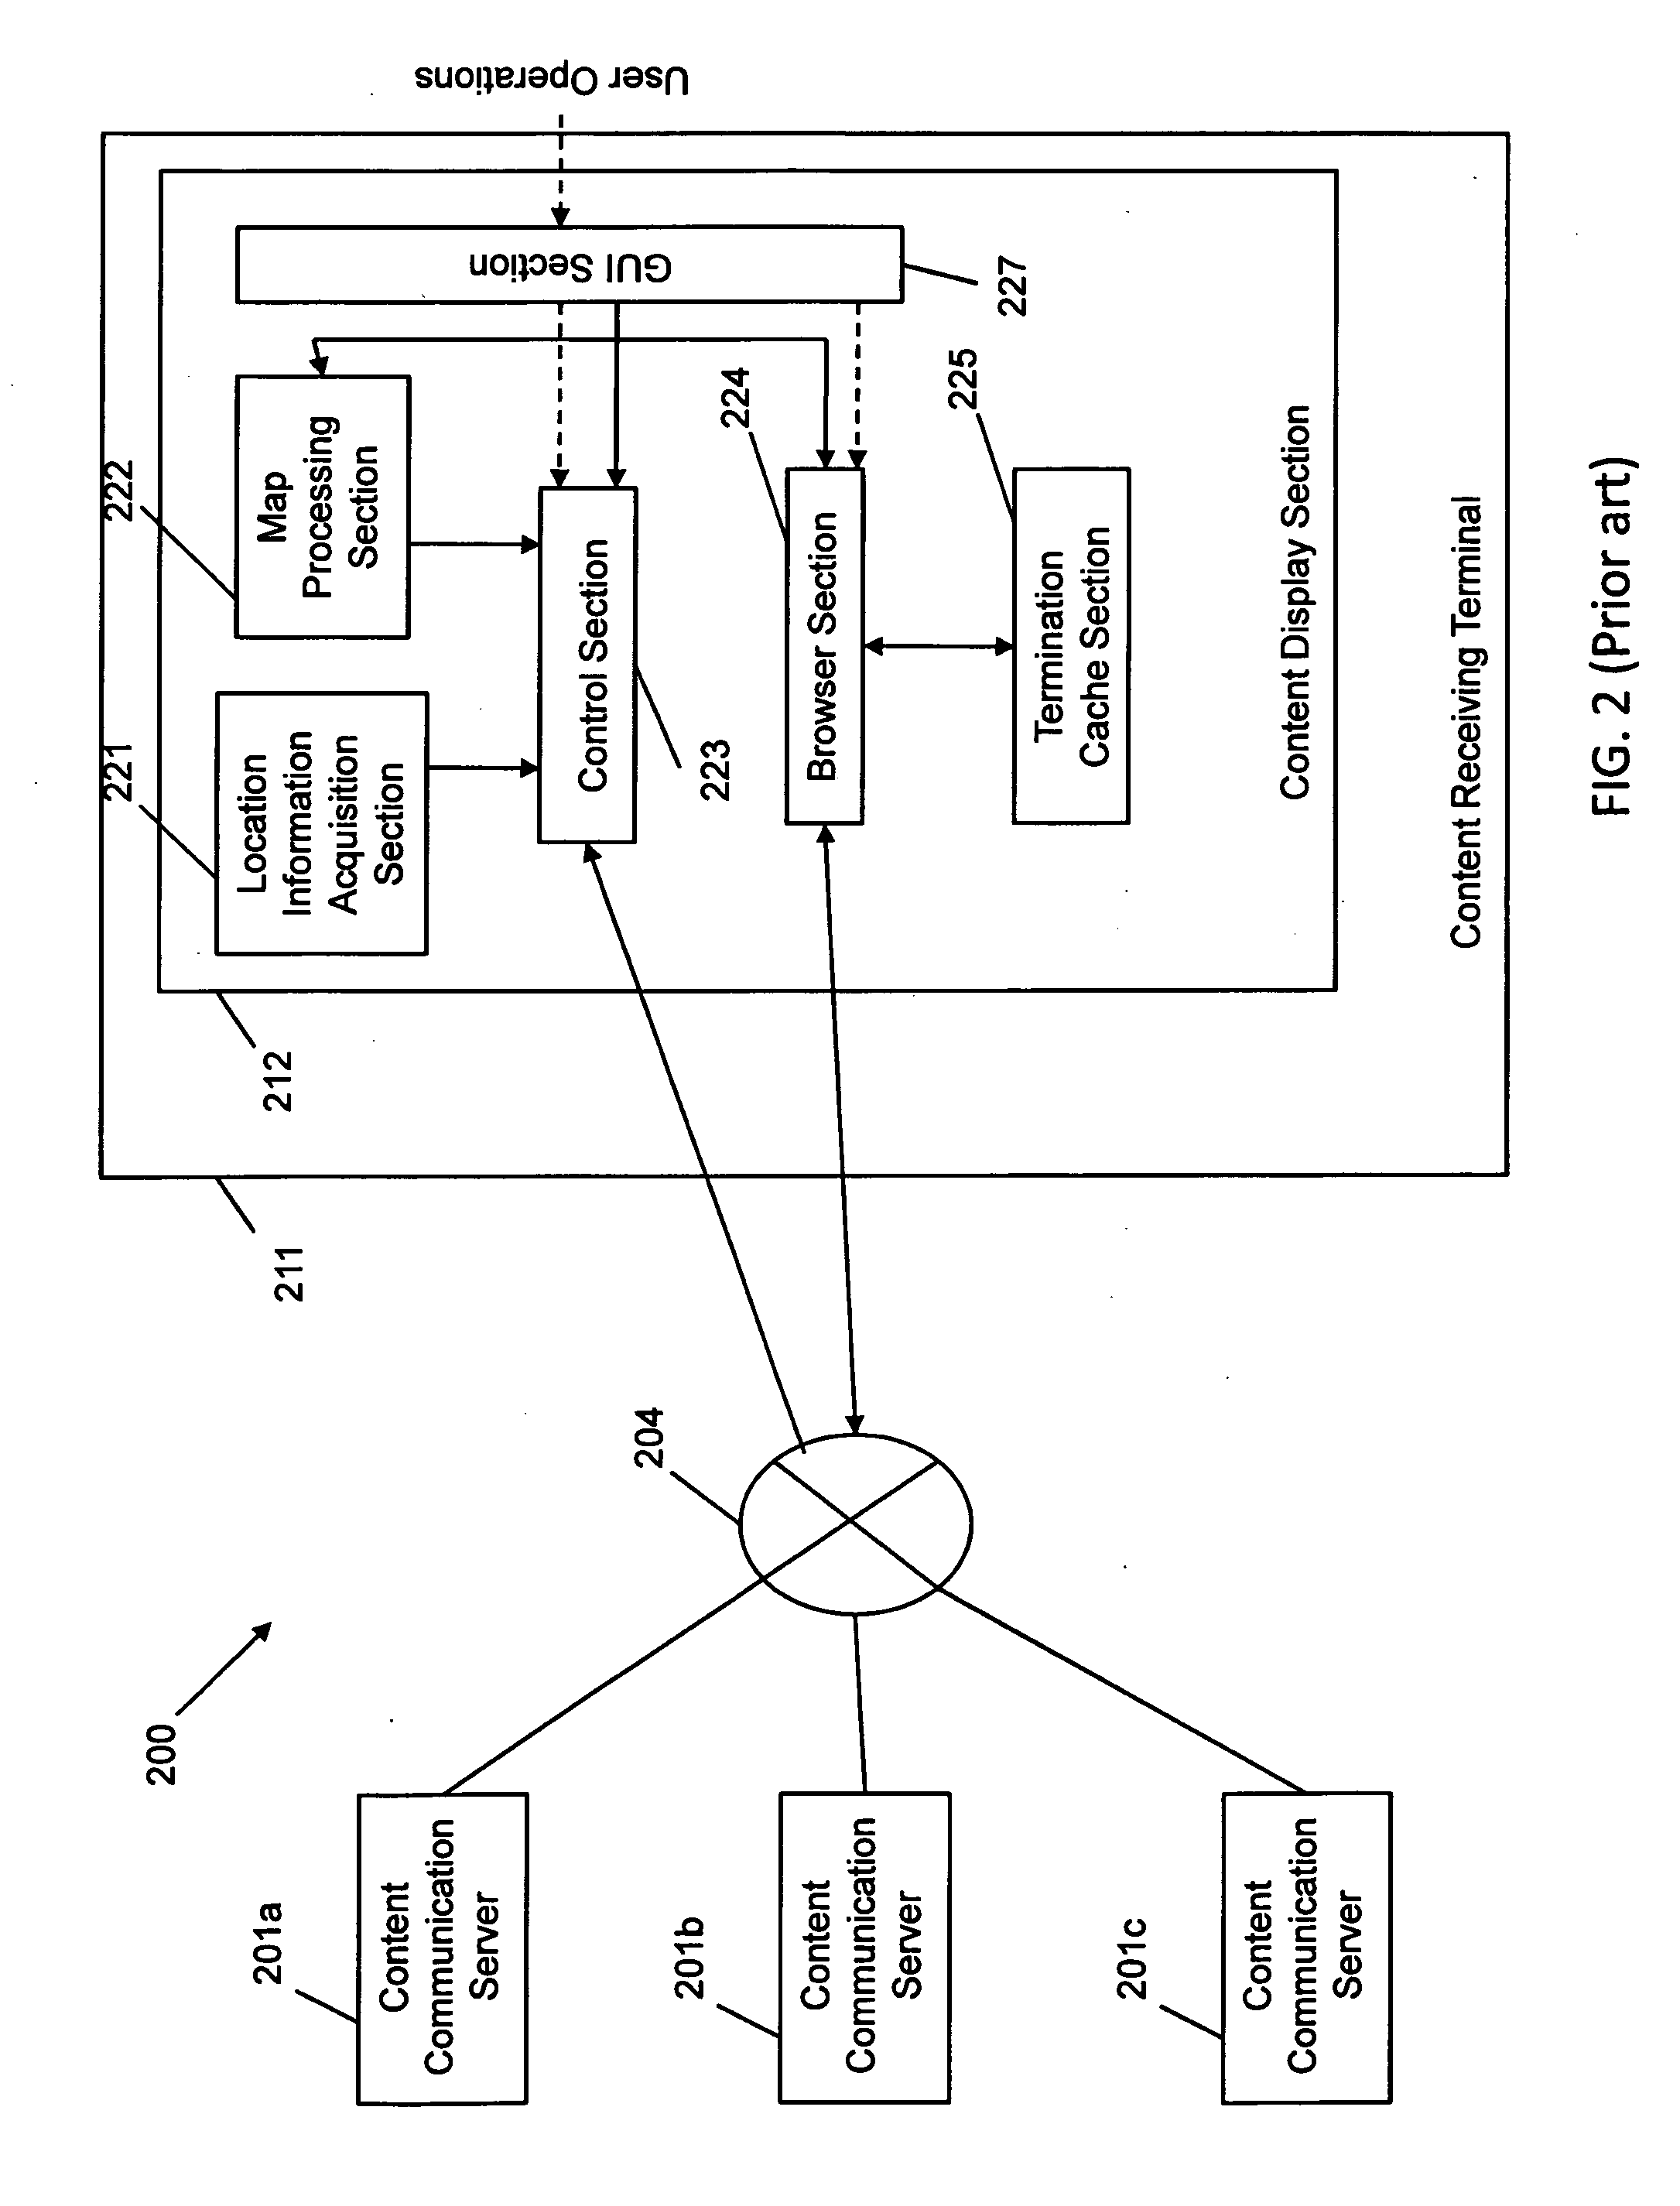 Method and apparatus for detecting arrival at new city and producing information on new city